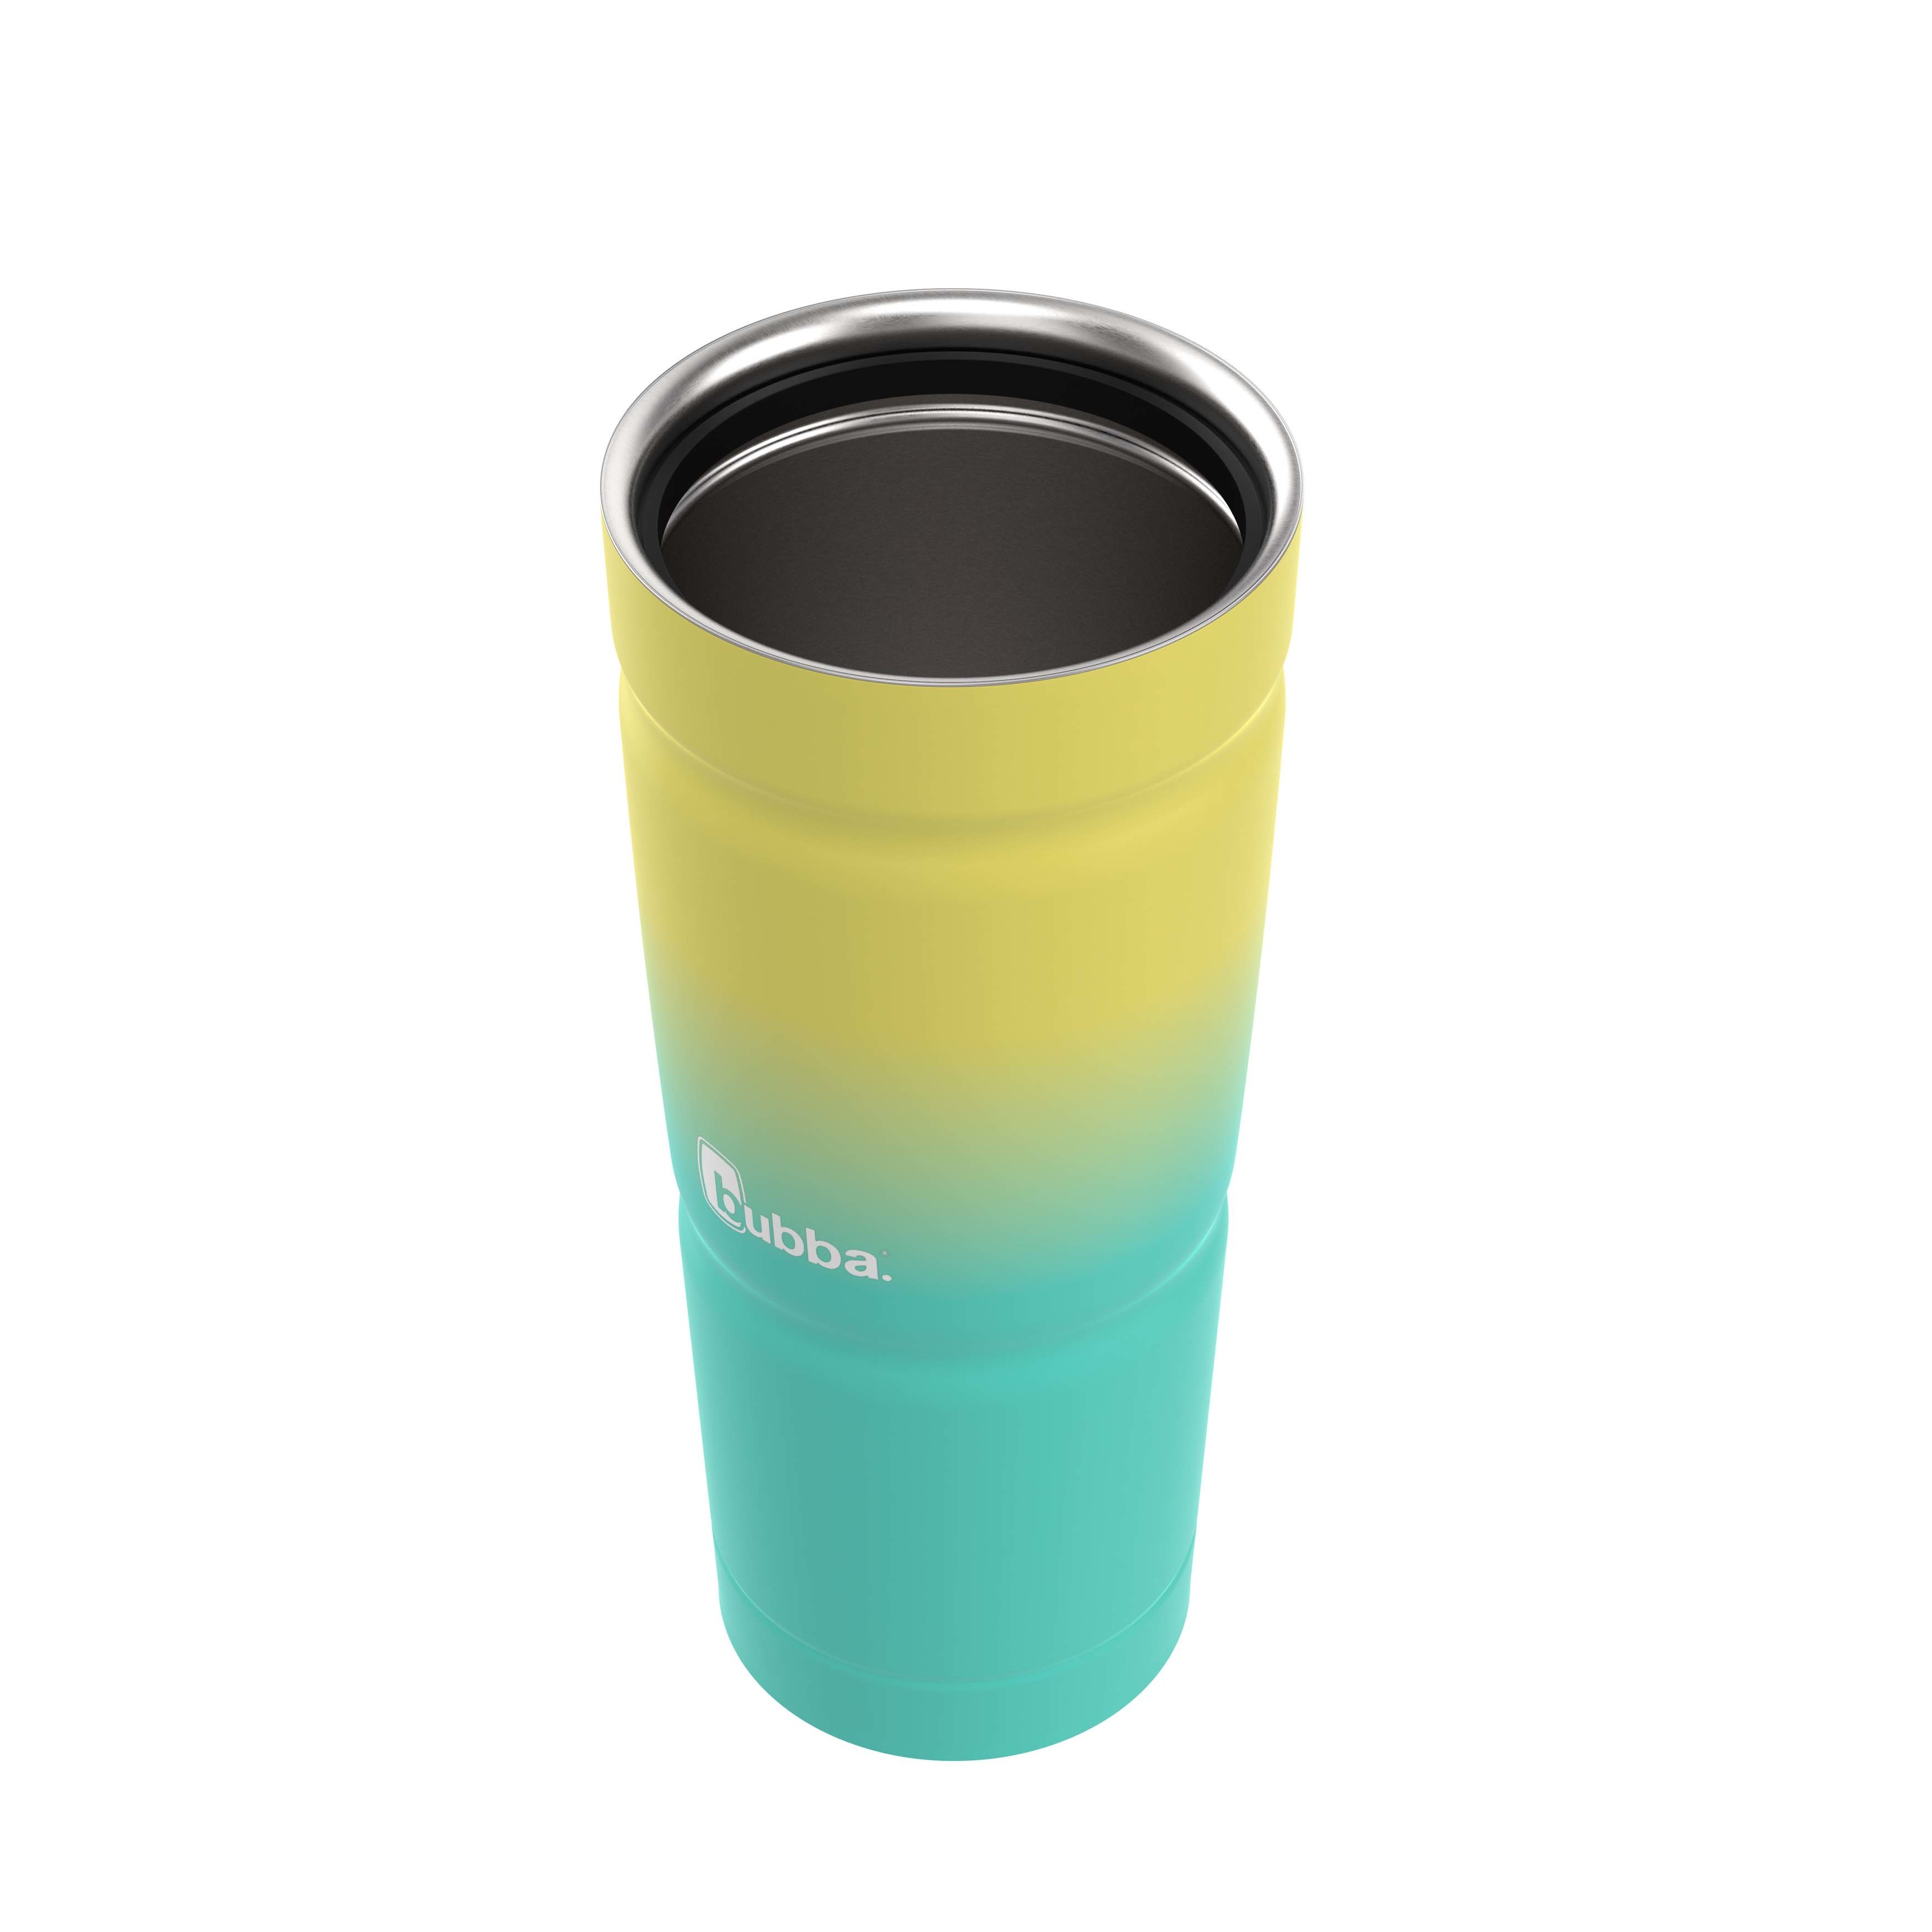 bubba Envy S Insulated Stainless Steel Tumbler with Straw, 24 Oz., Ombre - image 2 of 6